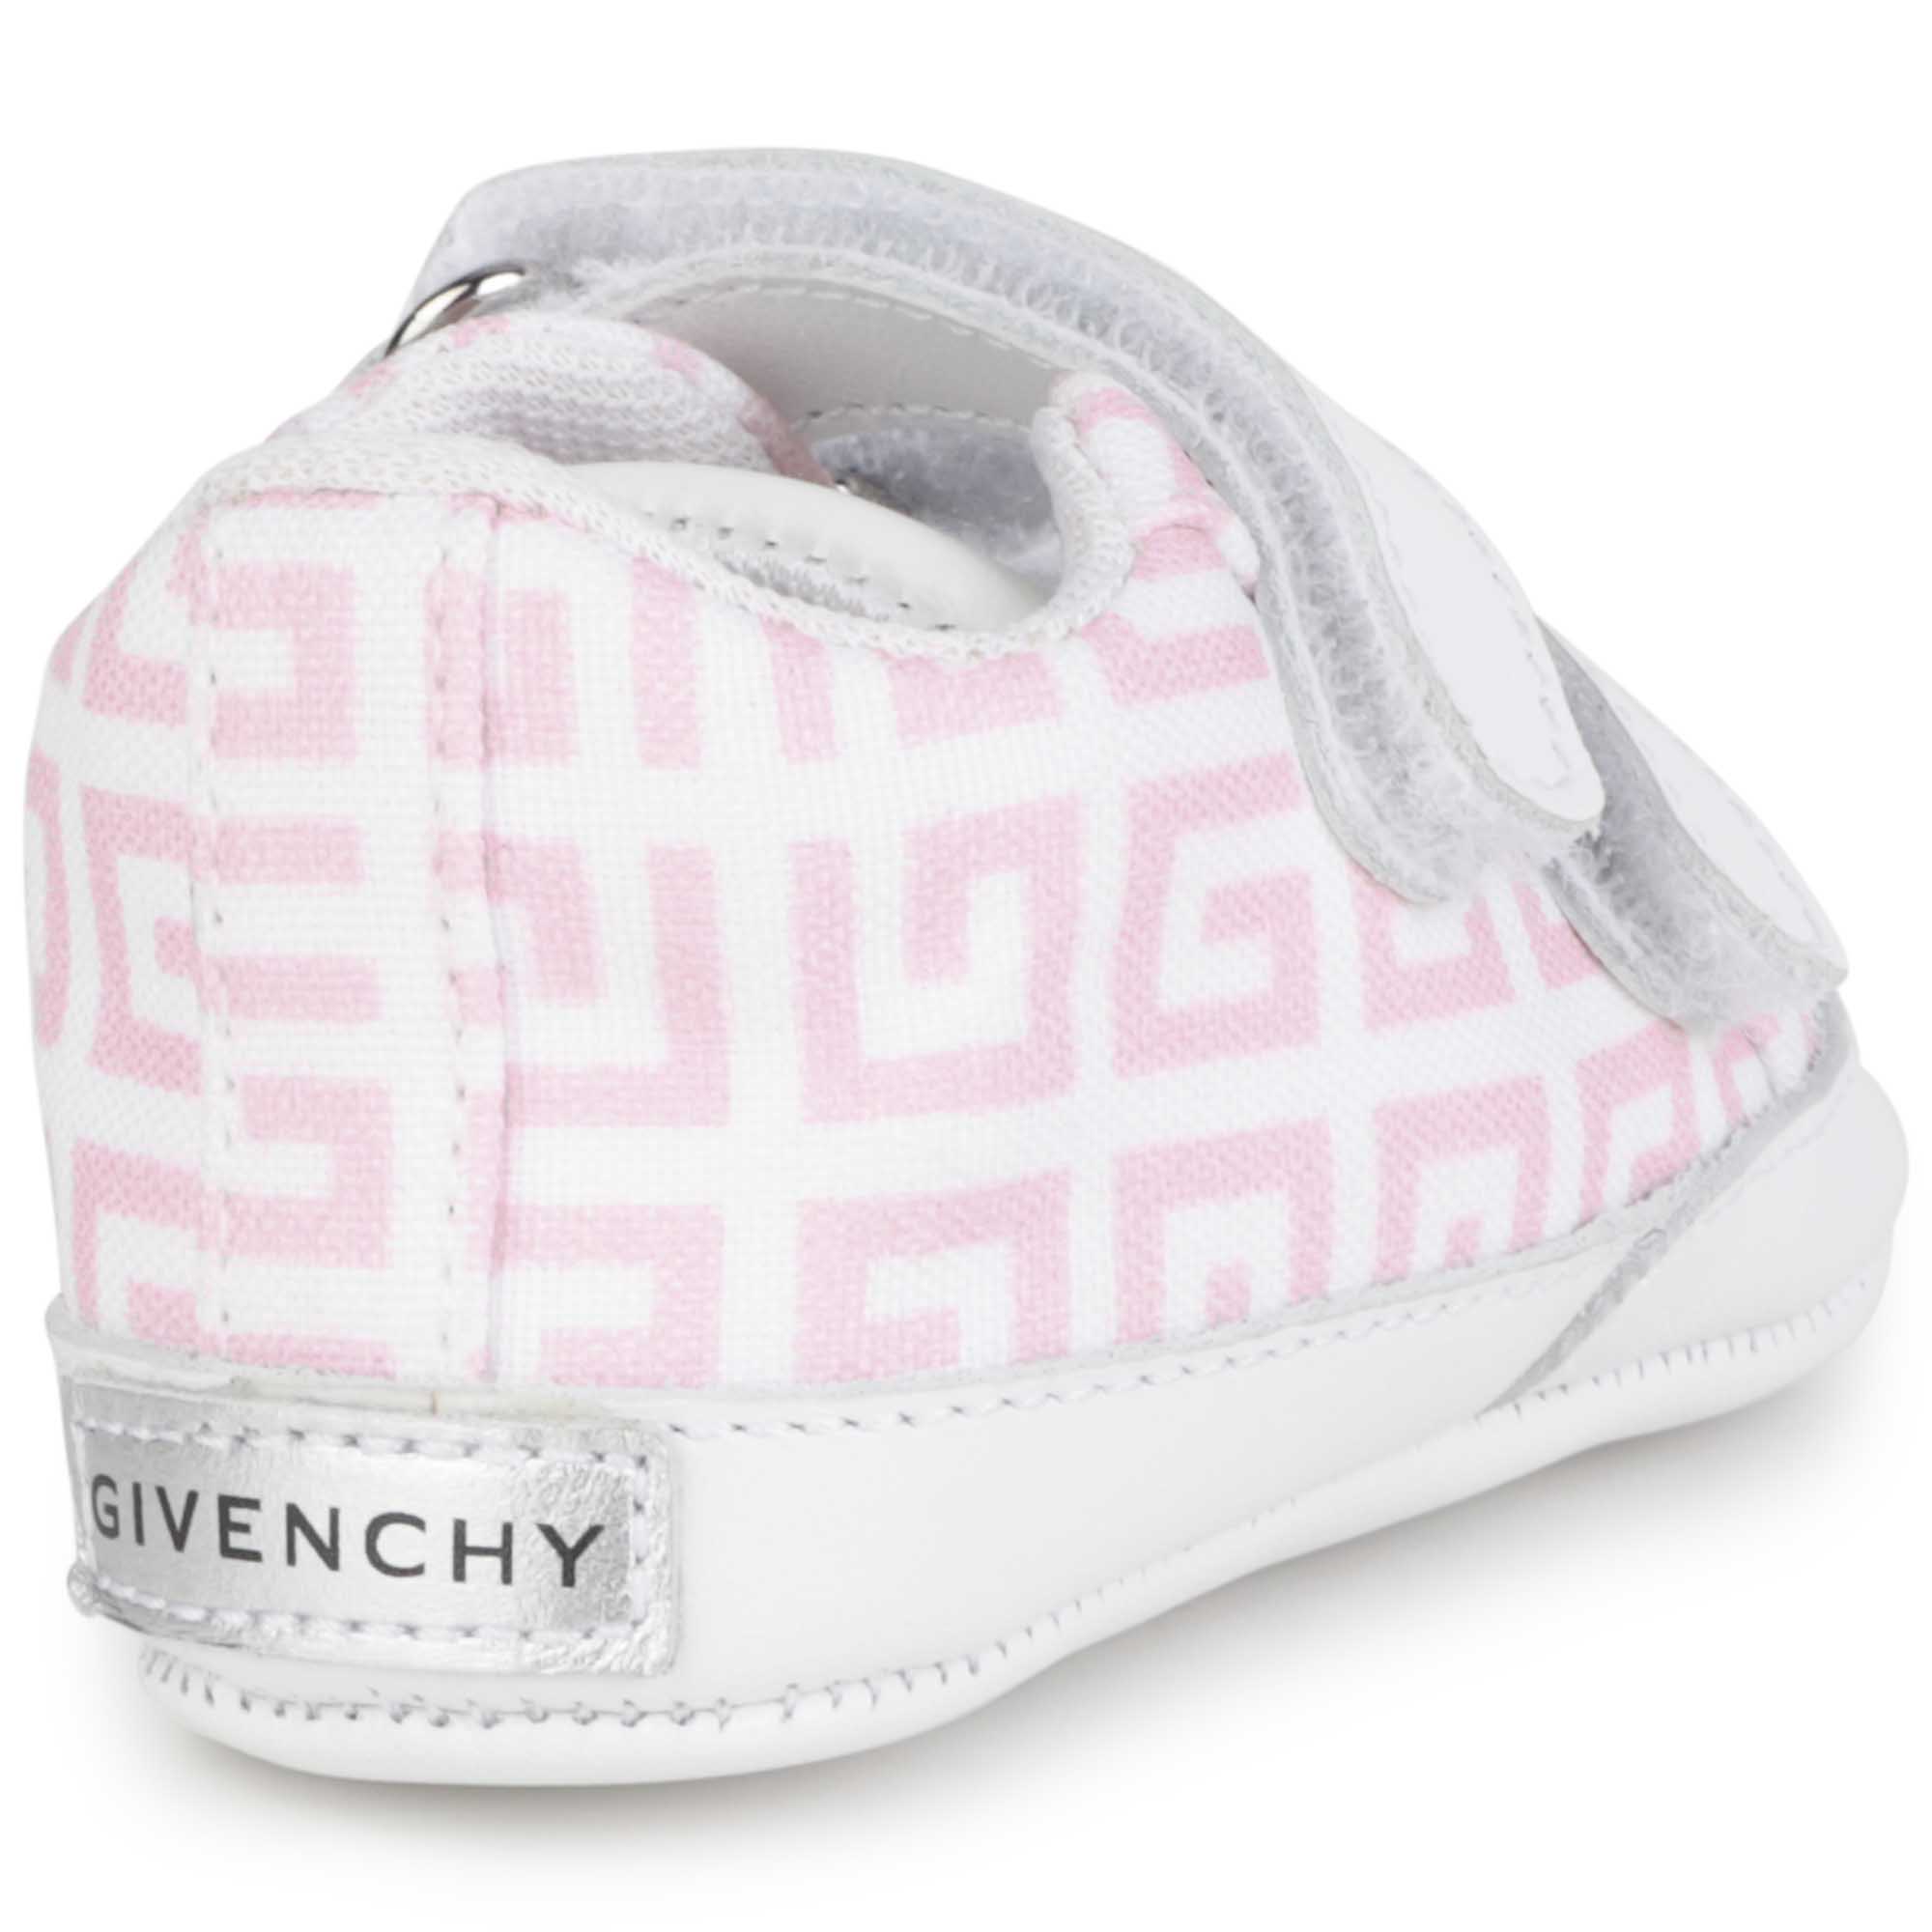 SLOFJE GIVENCHY Voor